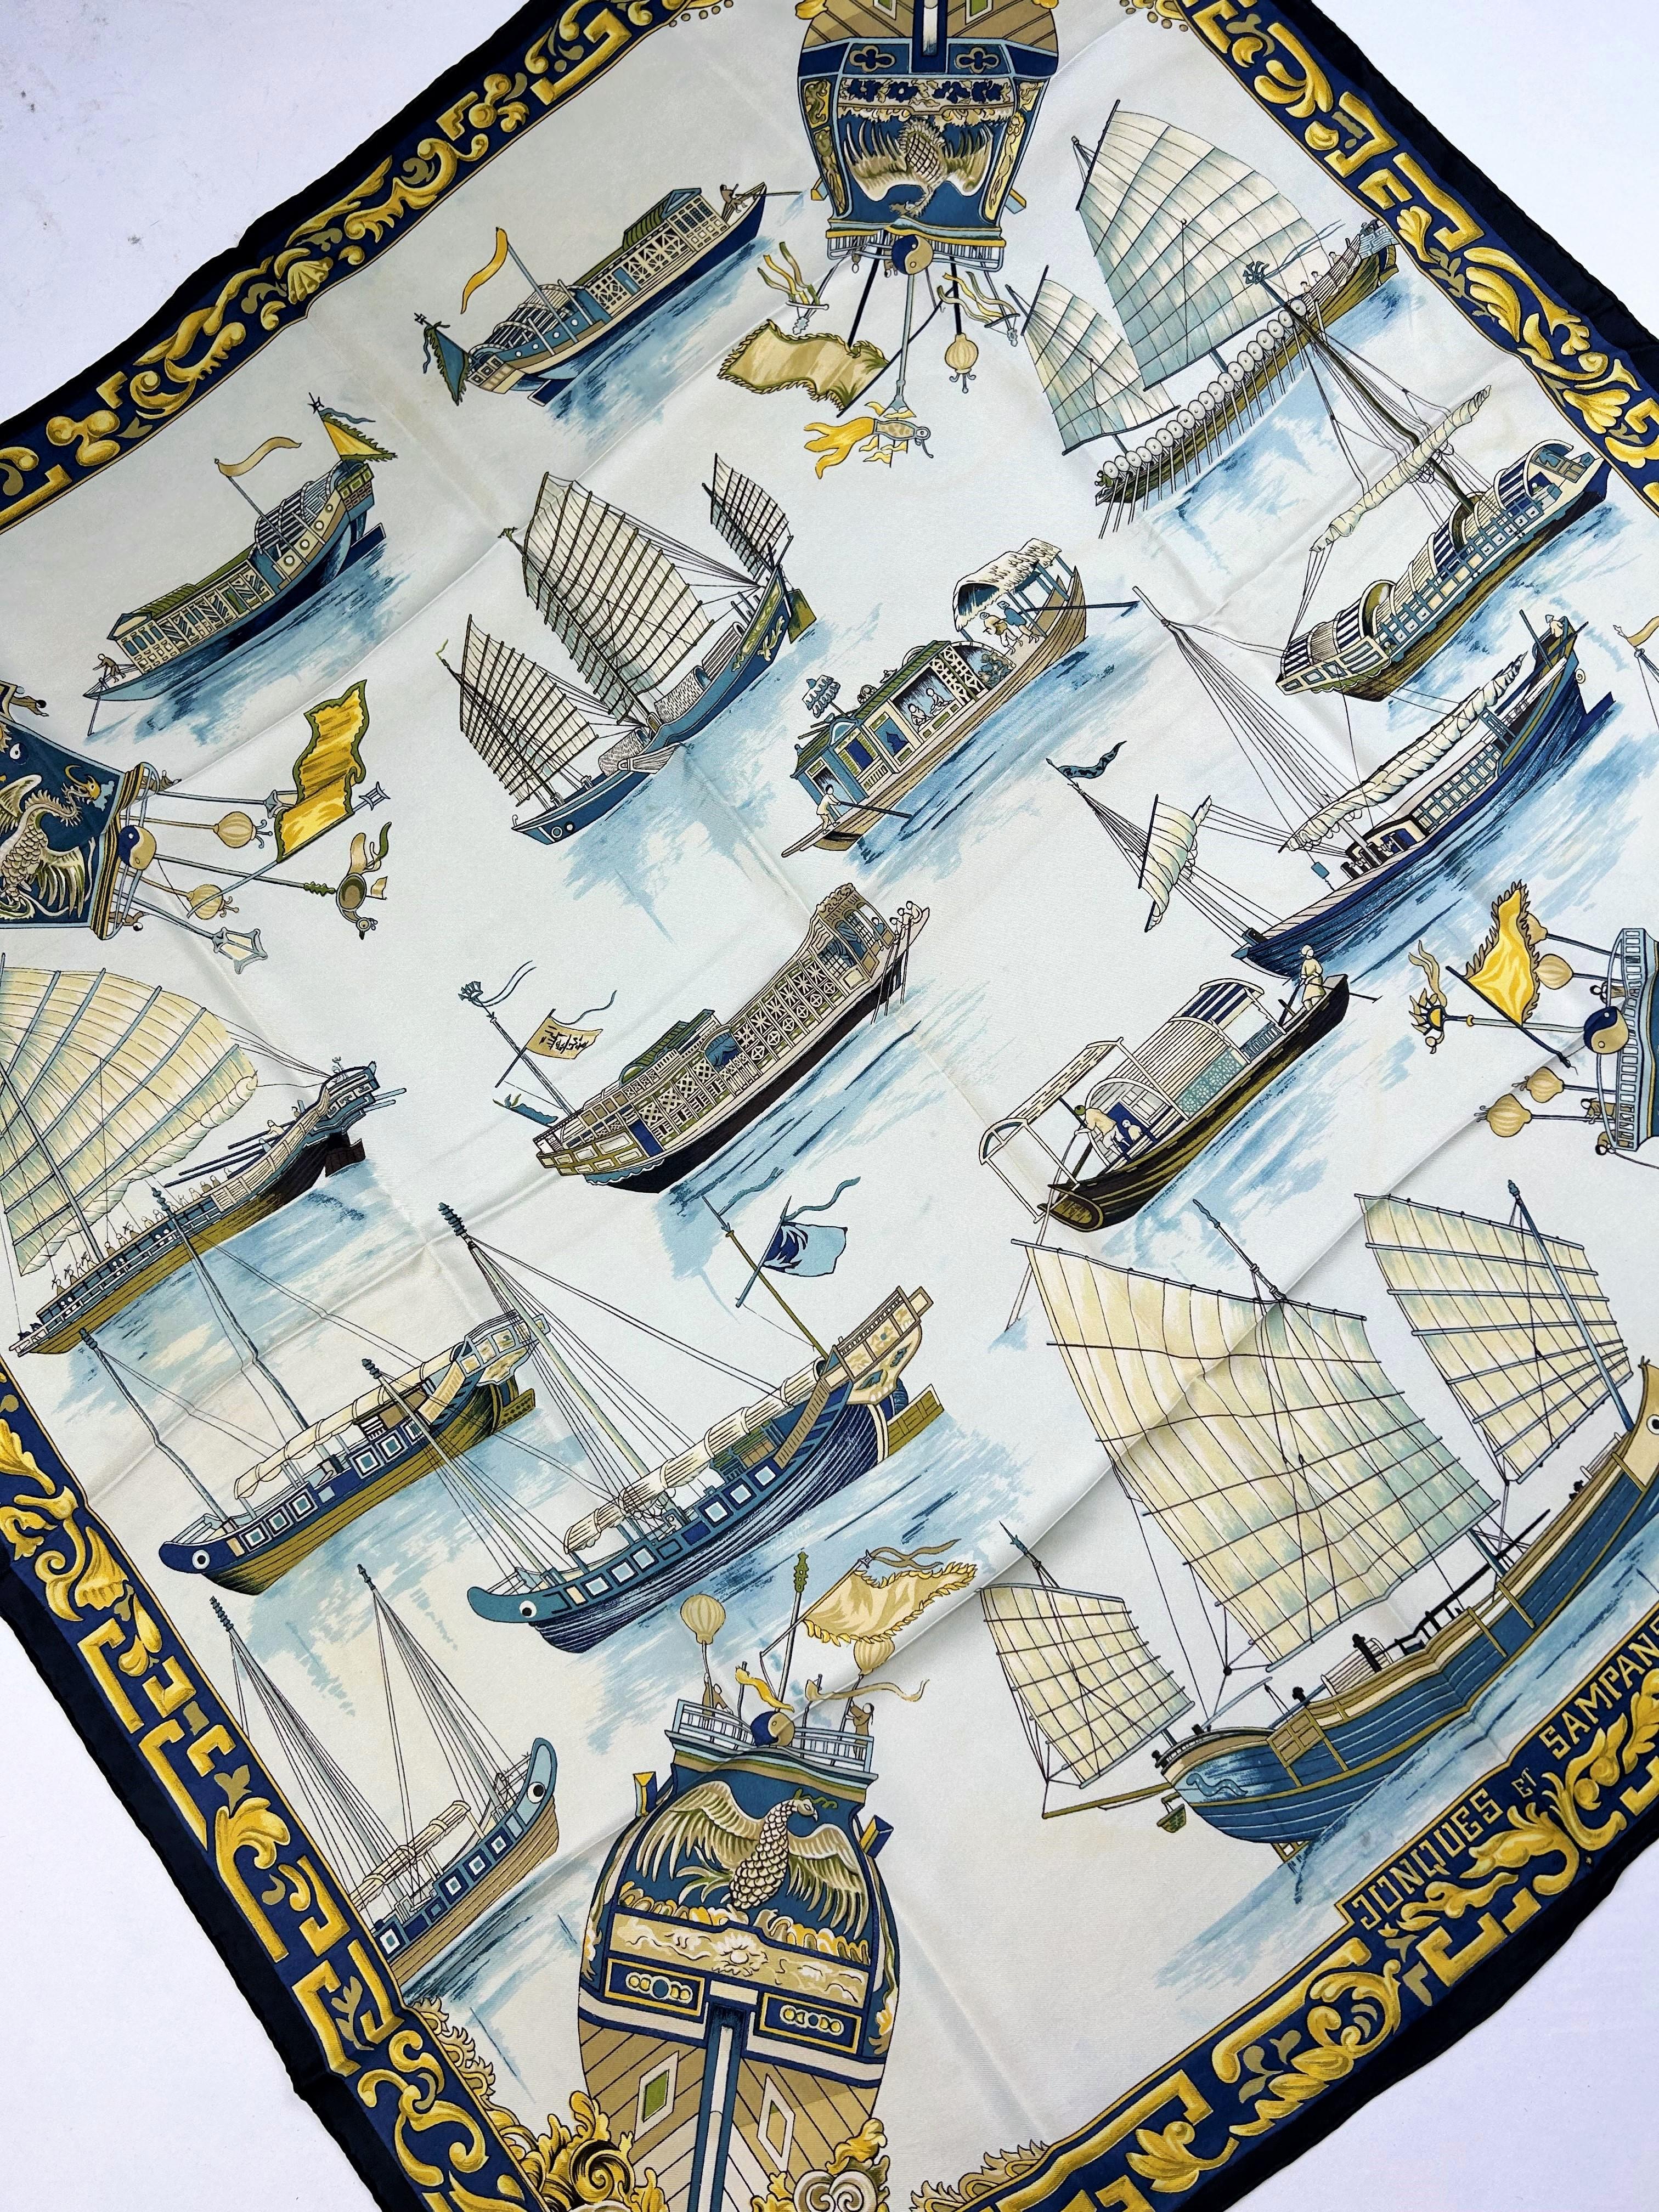 Circa 1966
France 

A Vintage Hermès silk Scarf entitled Jonques et Sampans in silk twill printed in shades of blue and golden yellow. This is most likely the first edition of a design by Françoise de la Perrière dating from 1966. A second, later